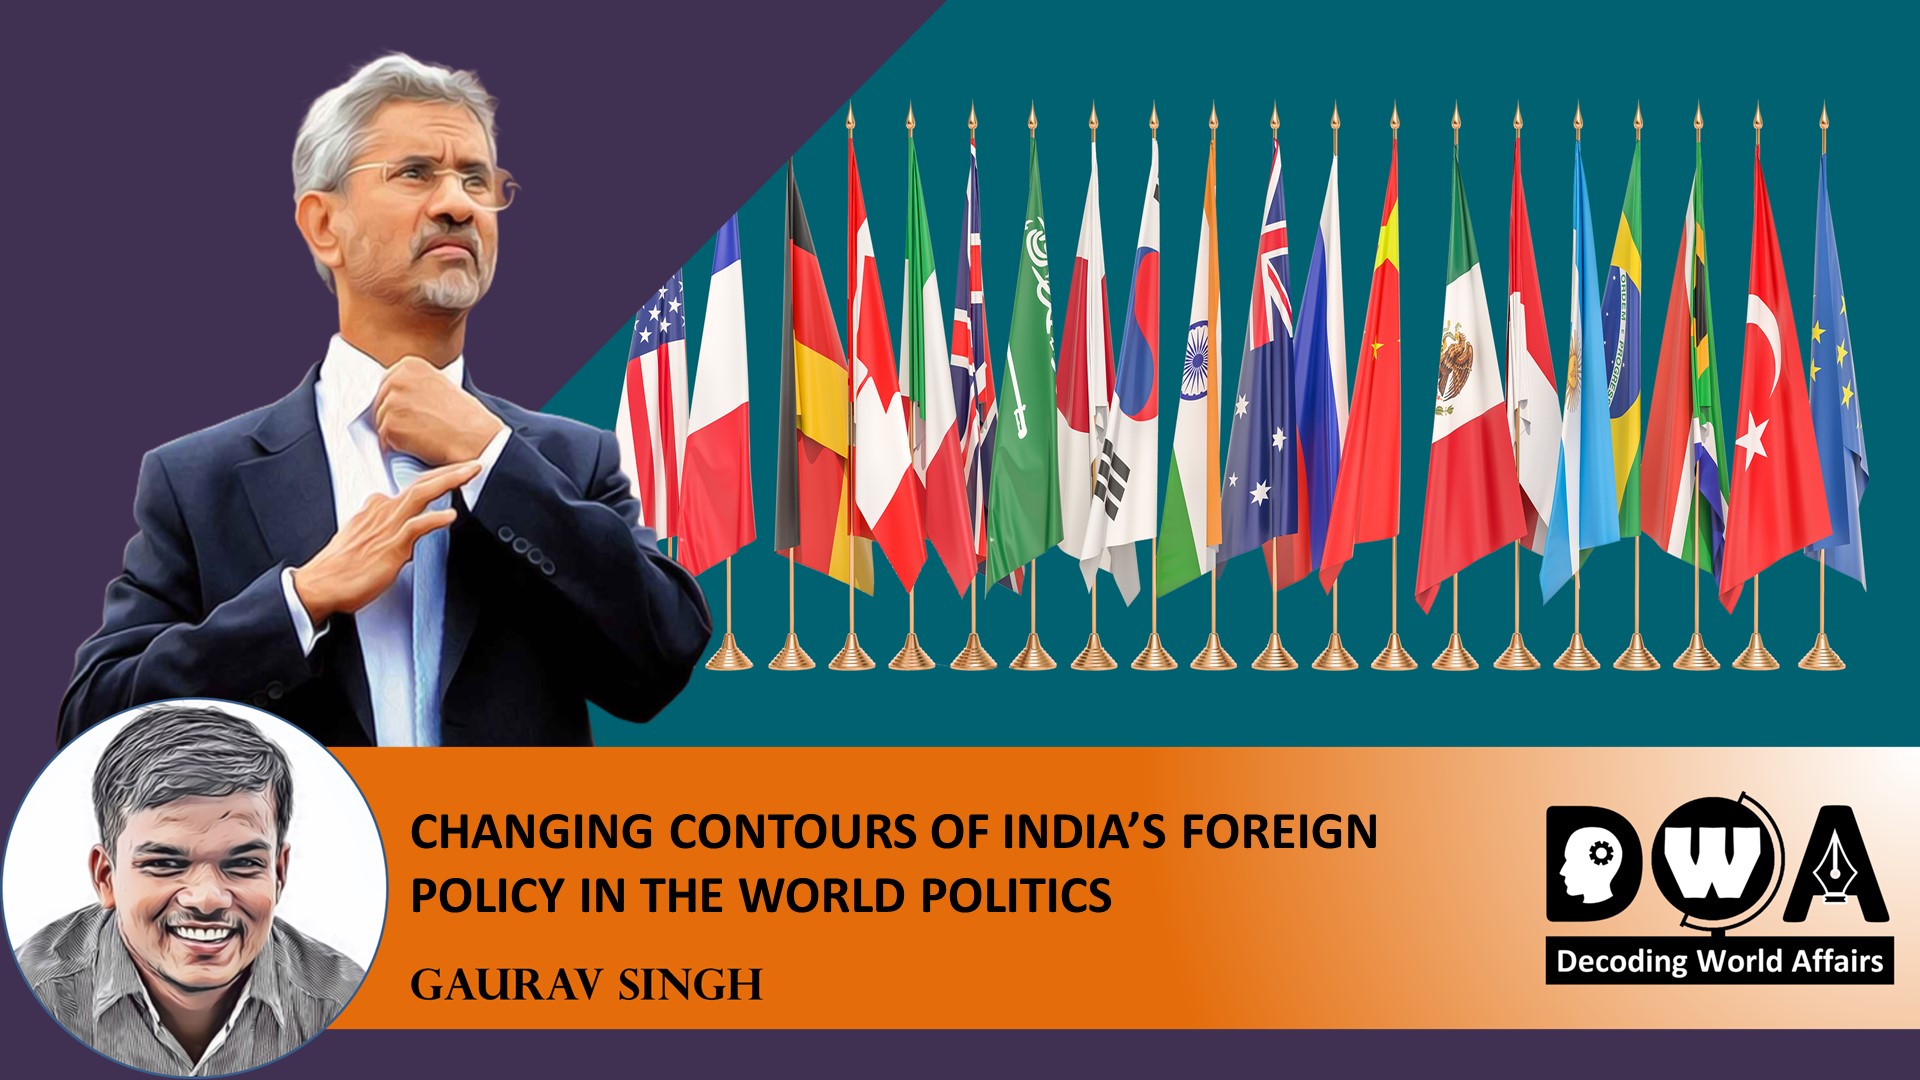 Changing Contours of Indian Foreign Policy in the world politics